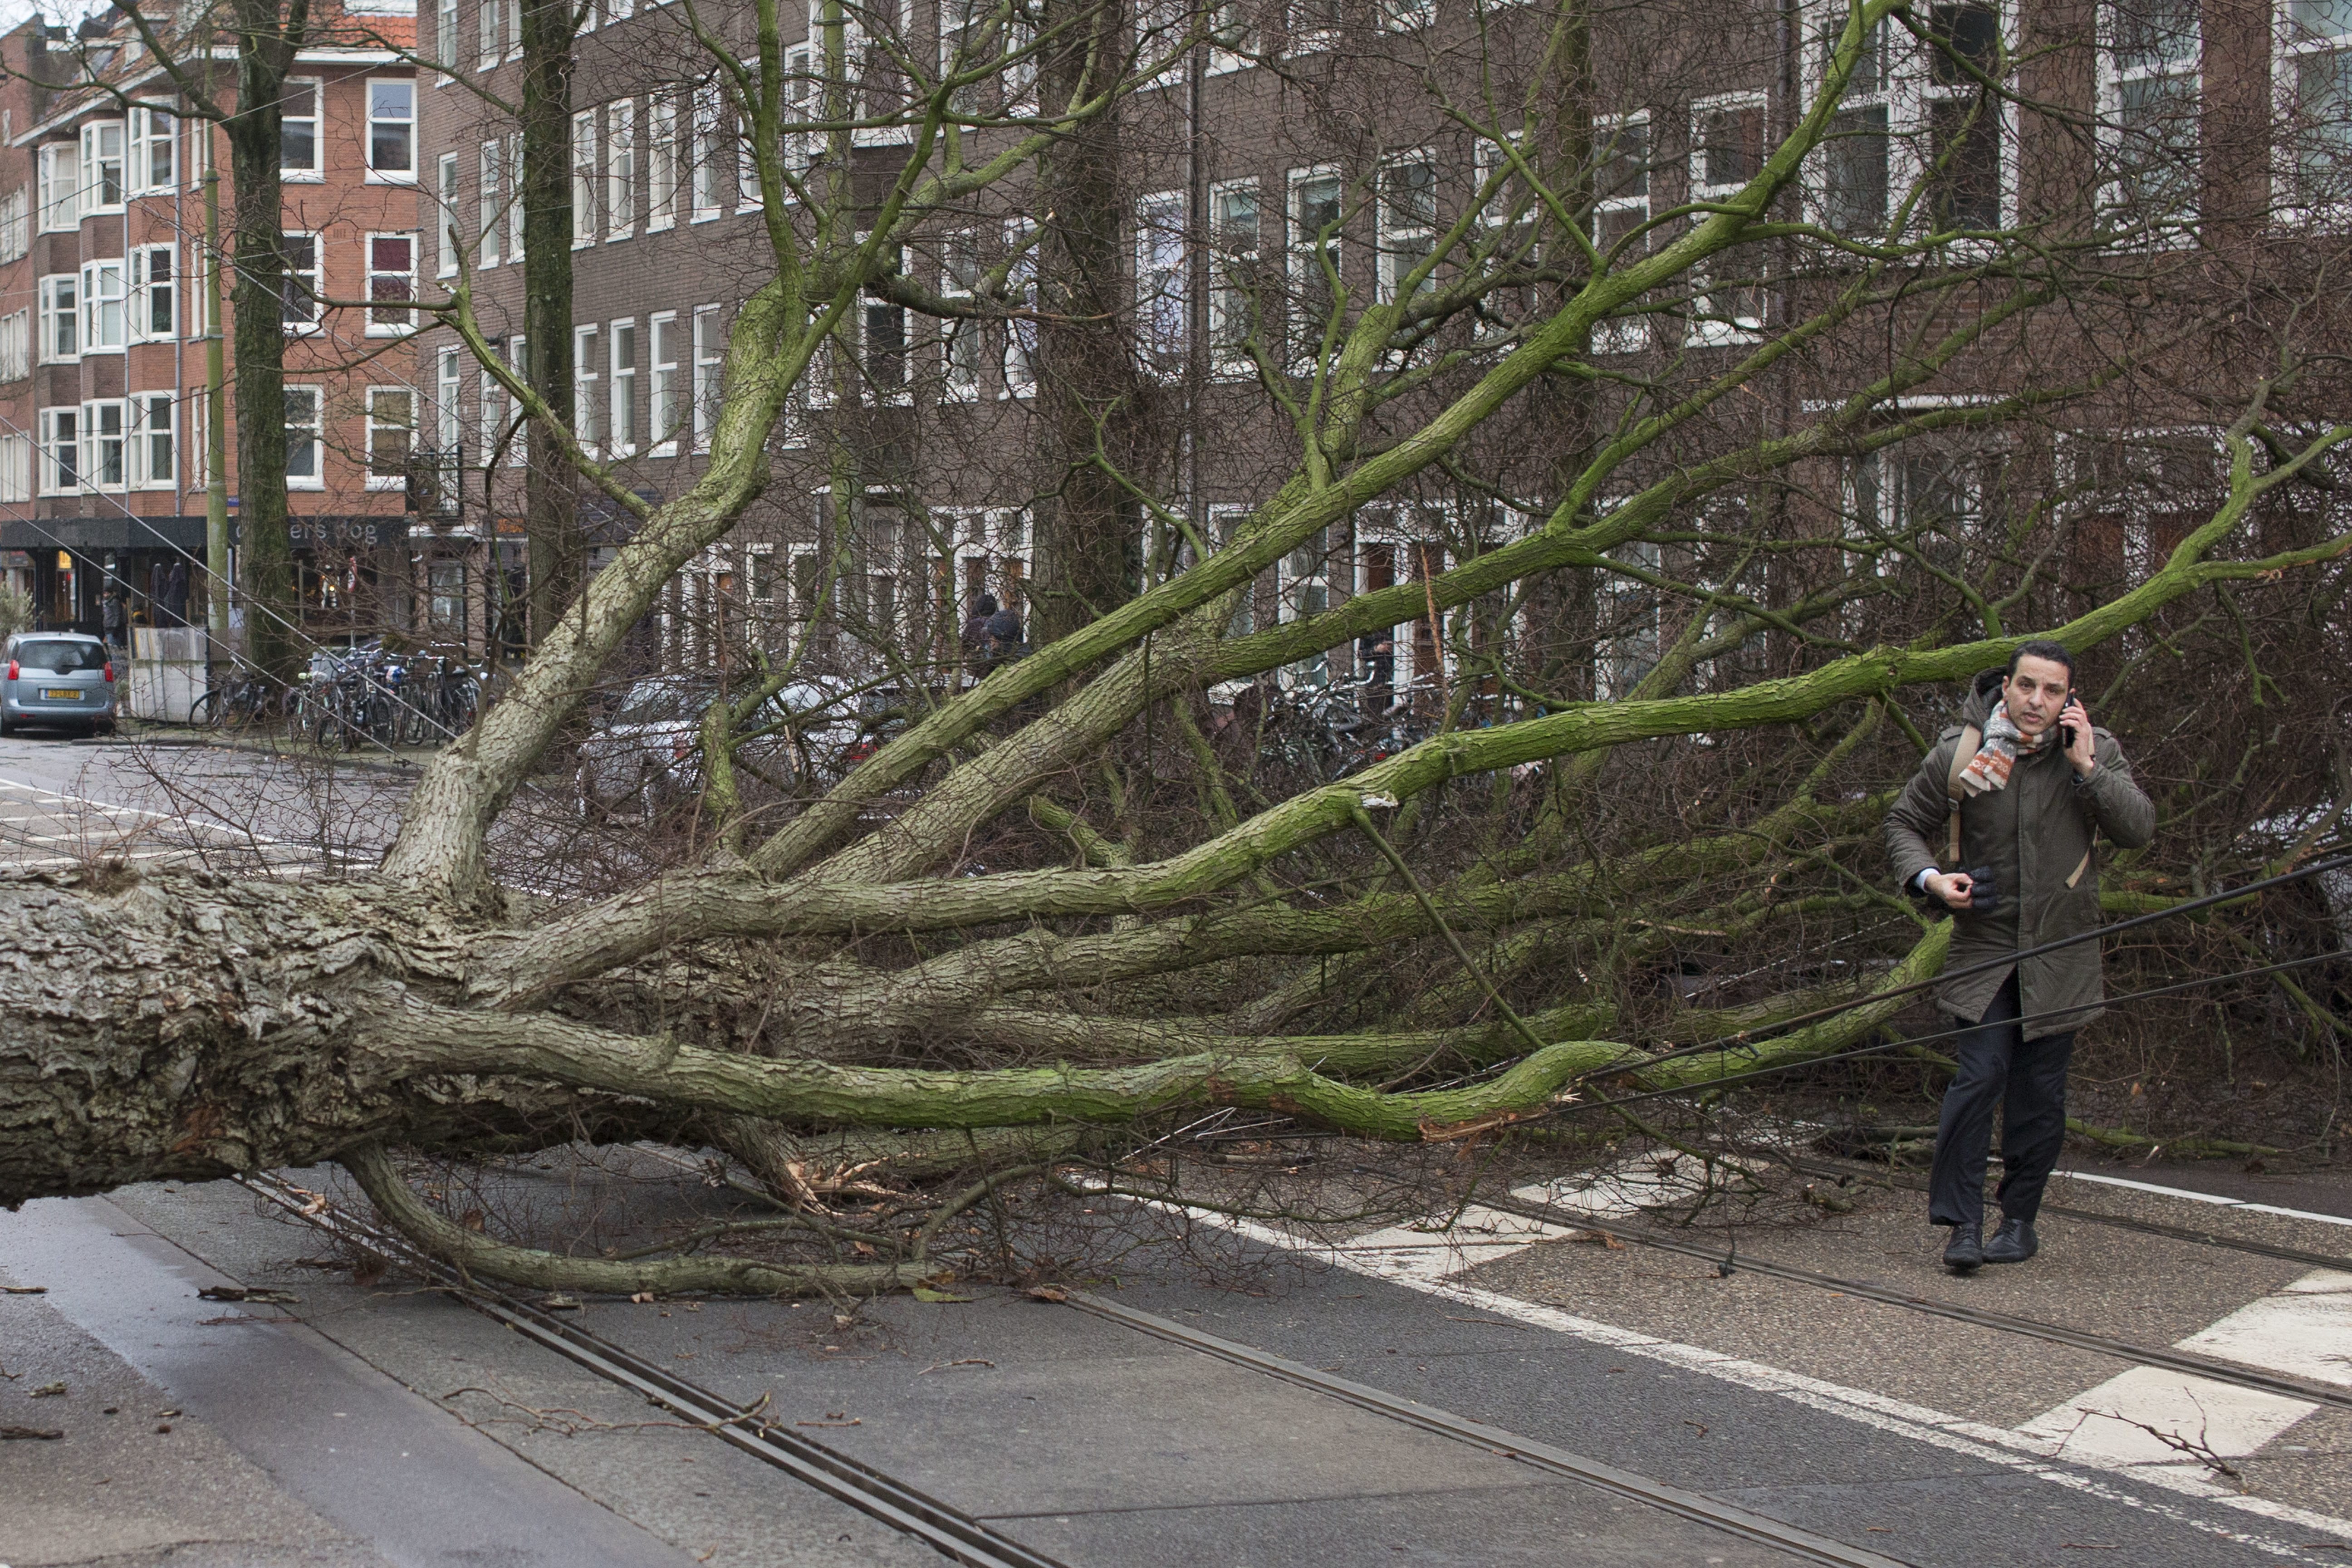 A man who escaped unharmed makes a phone call after his scooter was hit by a crashing tree uprooted by heavy winds in Amsterdam, Netherlands, Thursday, Jan. 18, 2018. Scores of flights and trains were cancelled in The Netherlands and drivers were warned to stay off the roads as the country took a powerful hit of a storm which was set to lash large parts of Europe.